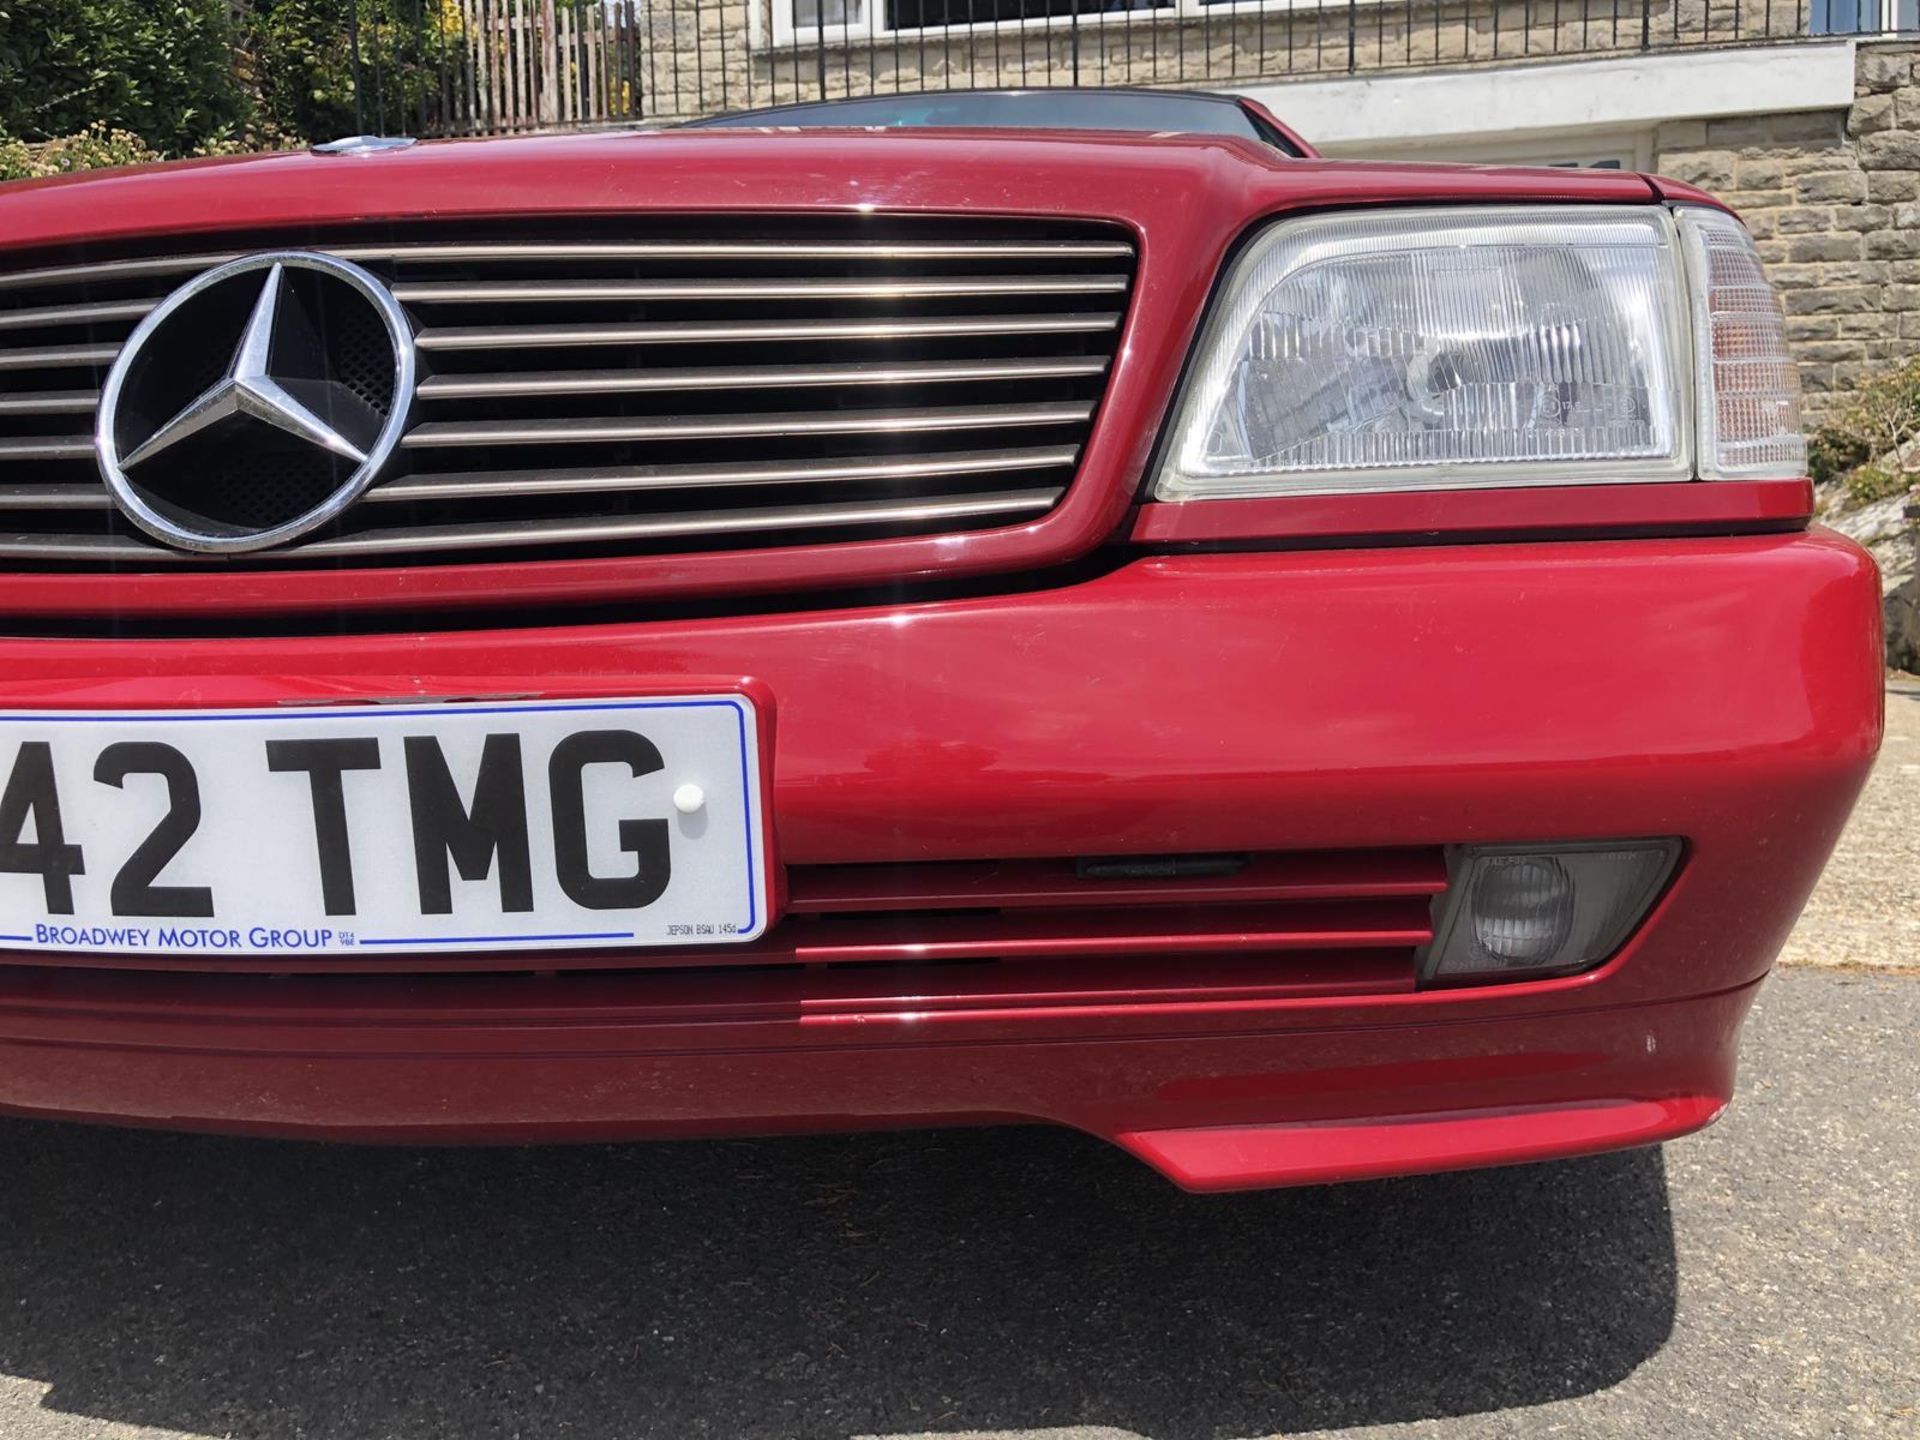 A 1995 Mercedes-Benz 280SL Registration number M642 TMG V5C MOT expires February 2021 Red with a - Image 36 of 106